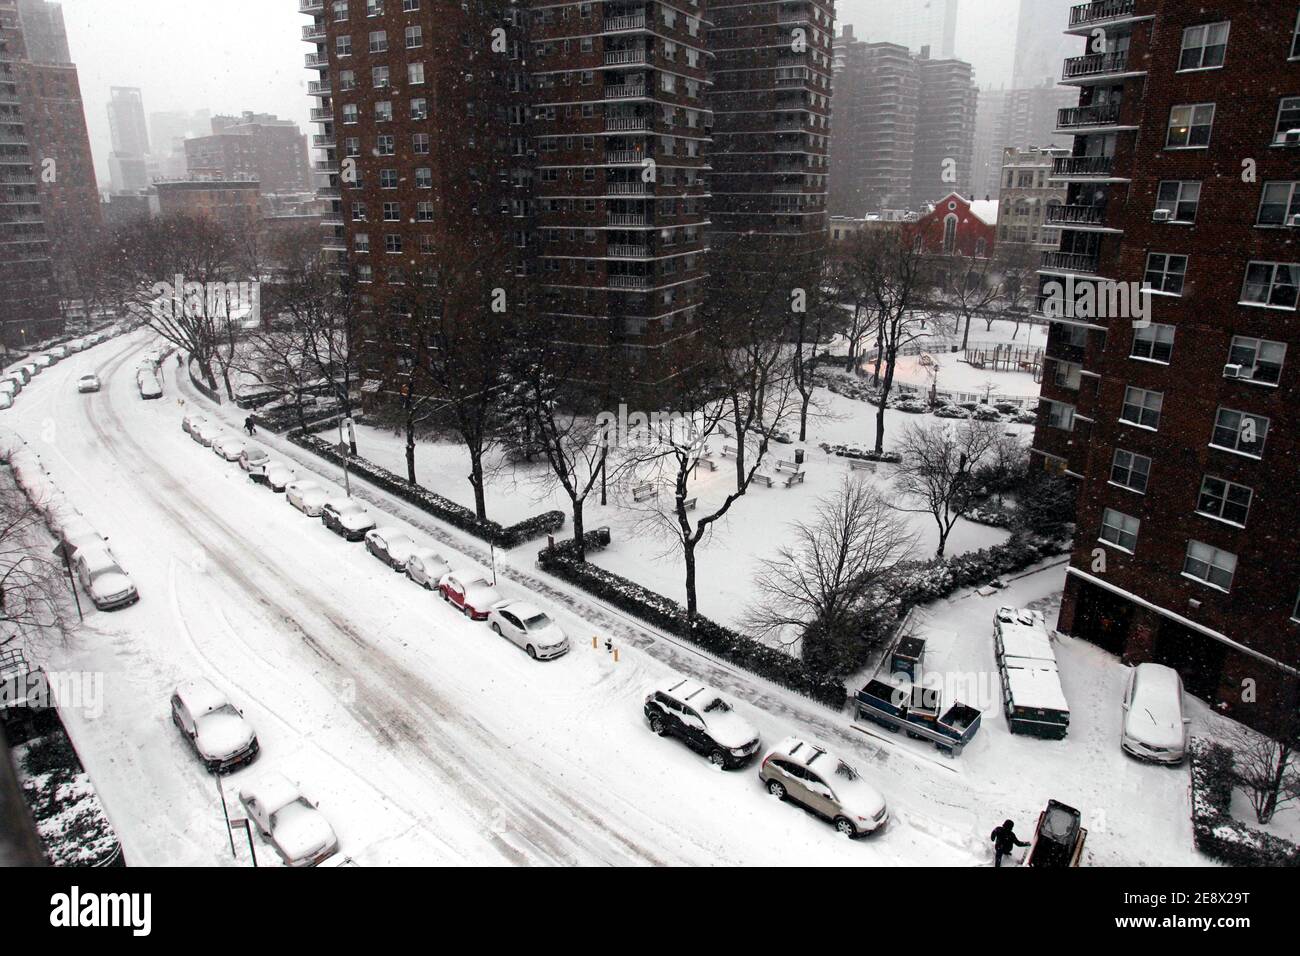 New York City, New York, United States. 1st Jan, 2021. Snow falls on the Chelsea section of Manhattan as a major snow storm blanketed the New York City area today. It is predicted the city could get as much as two feet of snow before the storm subsides. Credit: Adam Stoltman/Alamy Live News Stock Photo